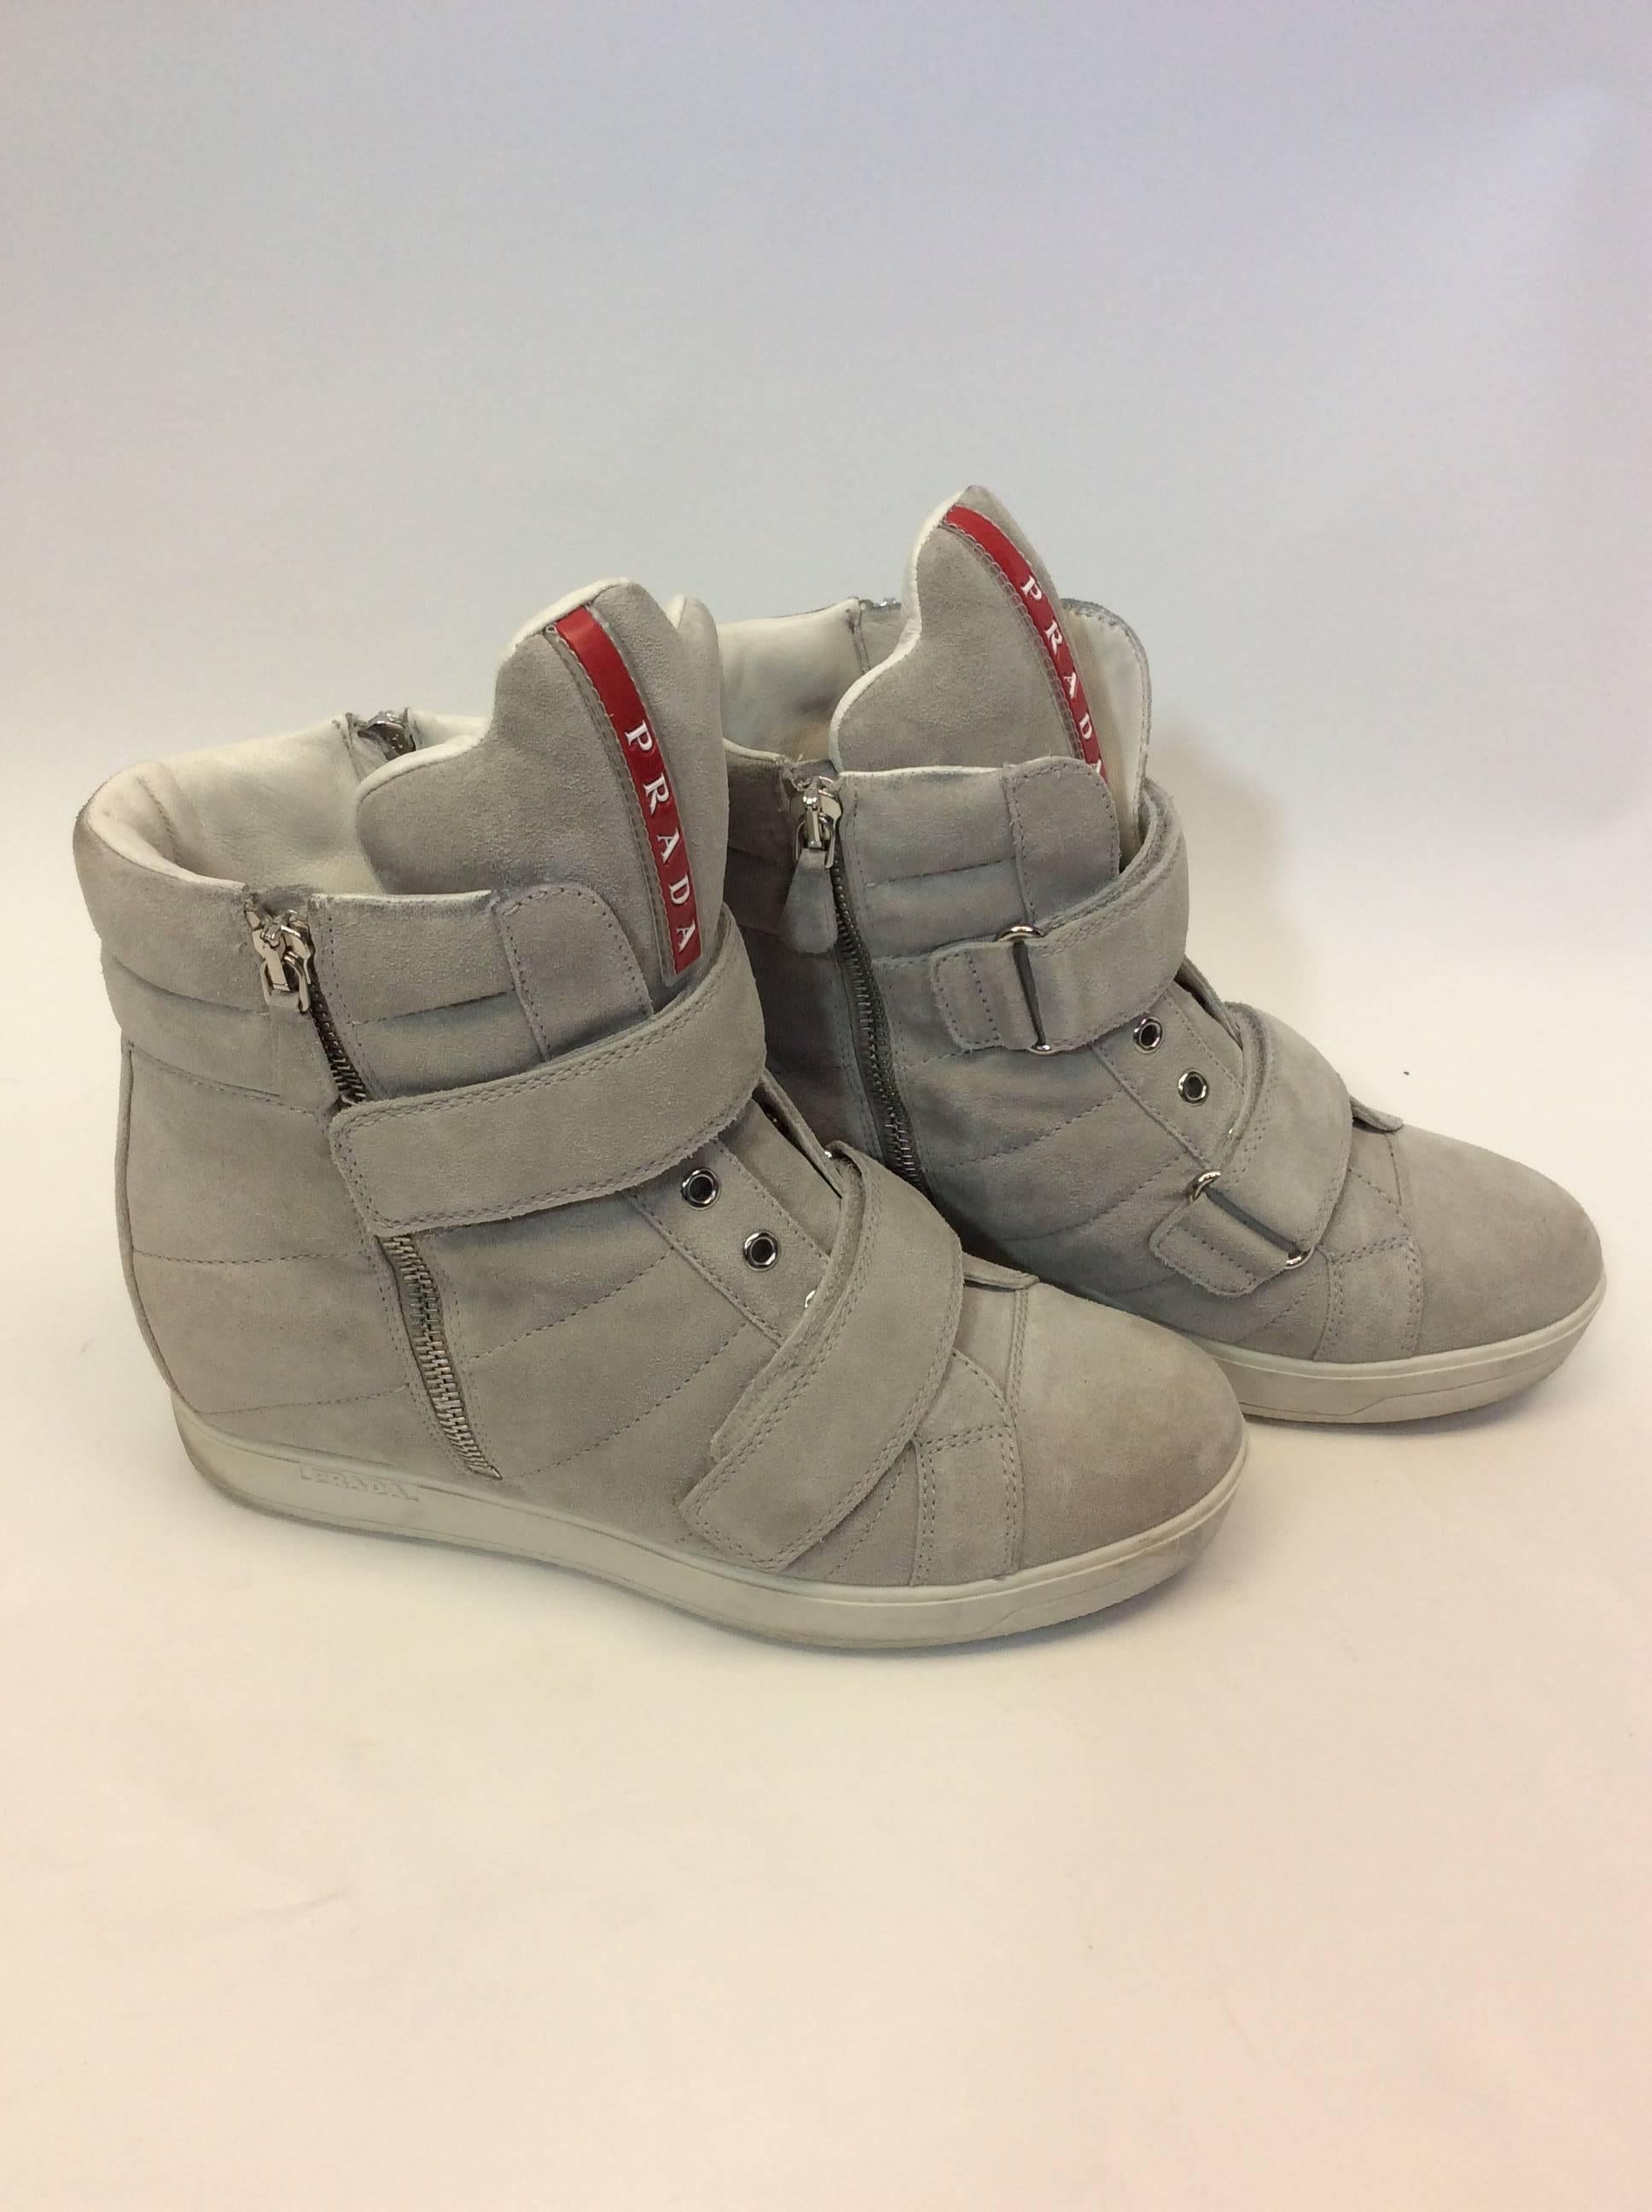 Prada Grey Suede Zipped Platform Sneakers In Excellent Condition For Sale In Narberth, PA